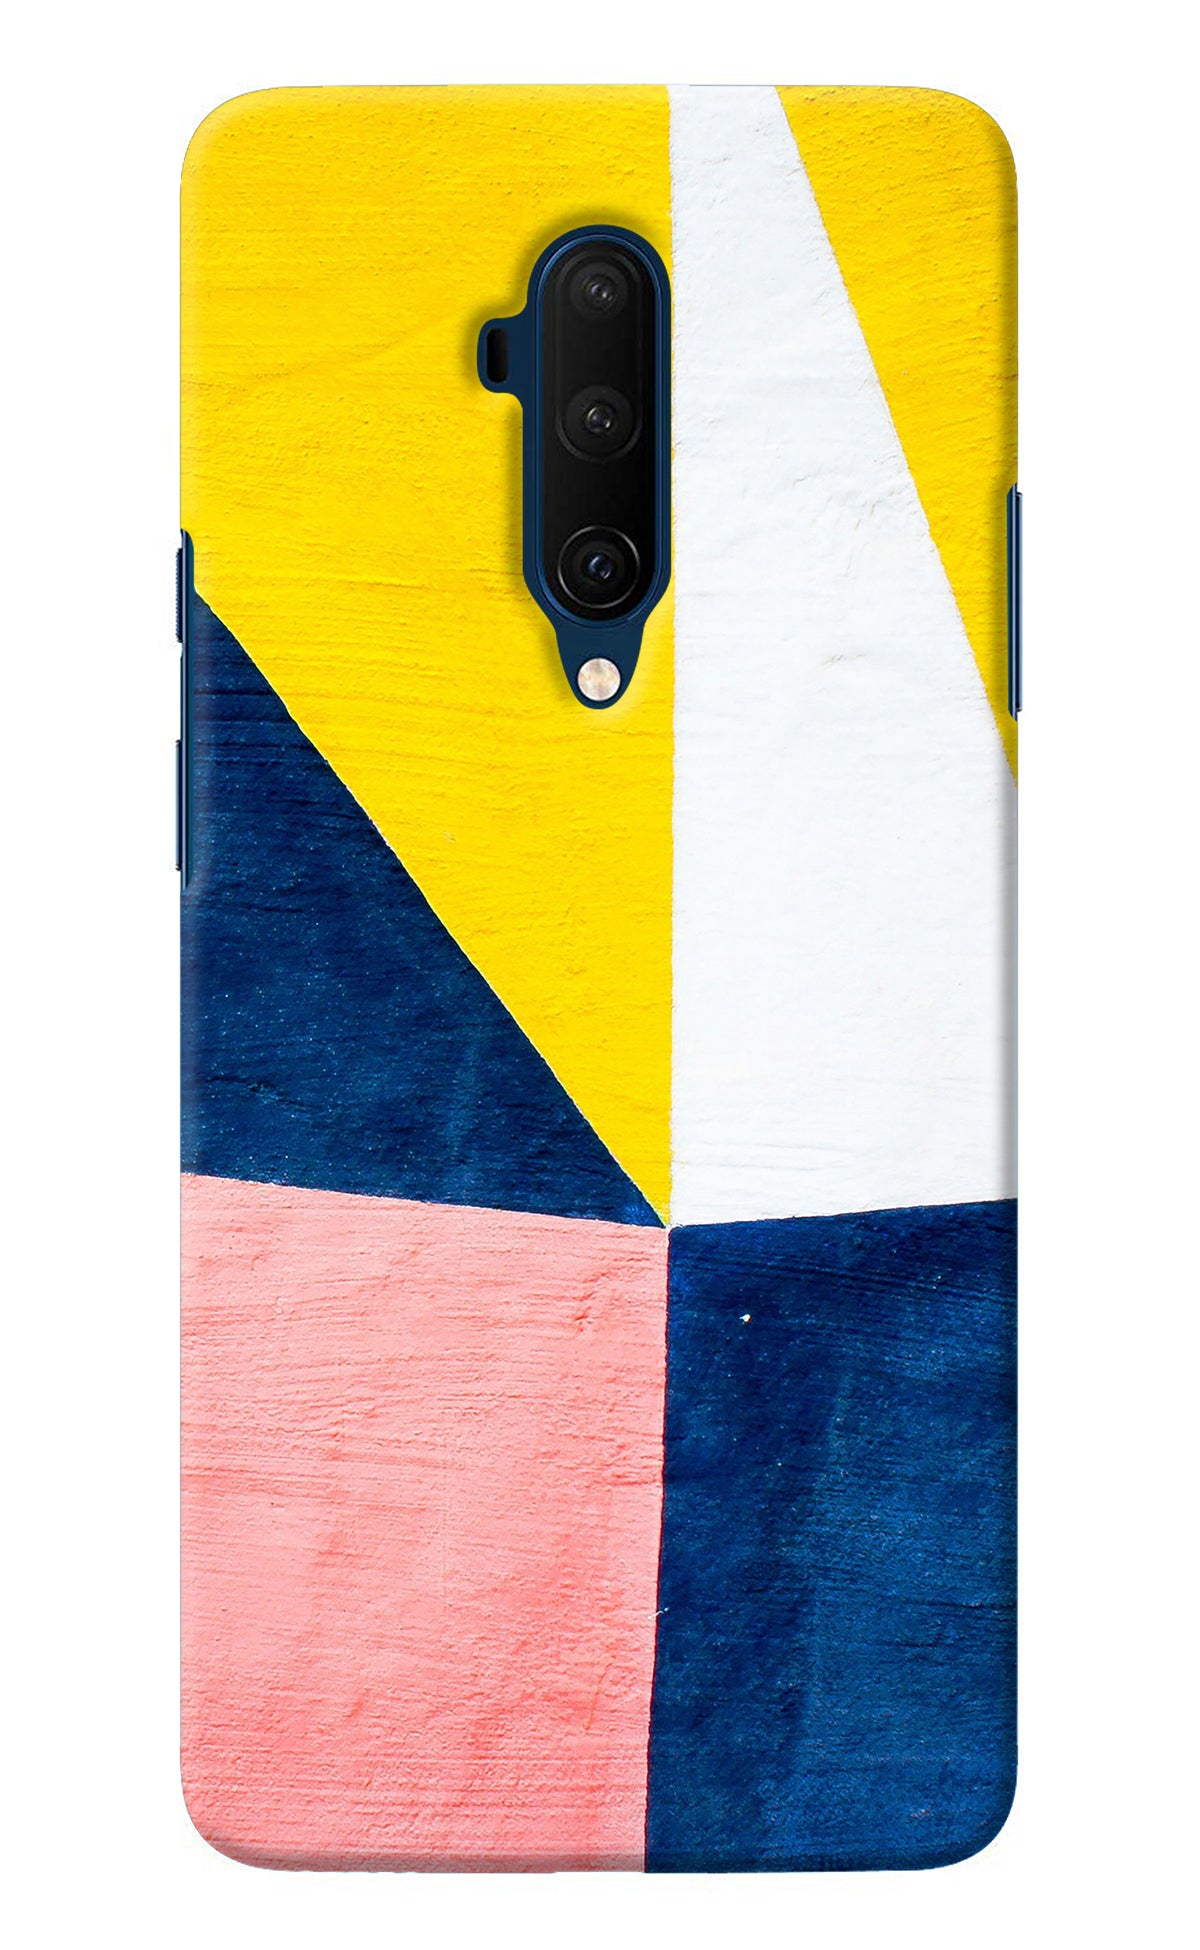 Colourful Art Oneplus 7T Pro Back Cover